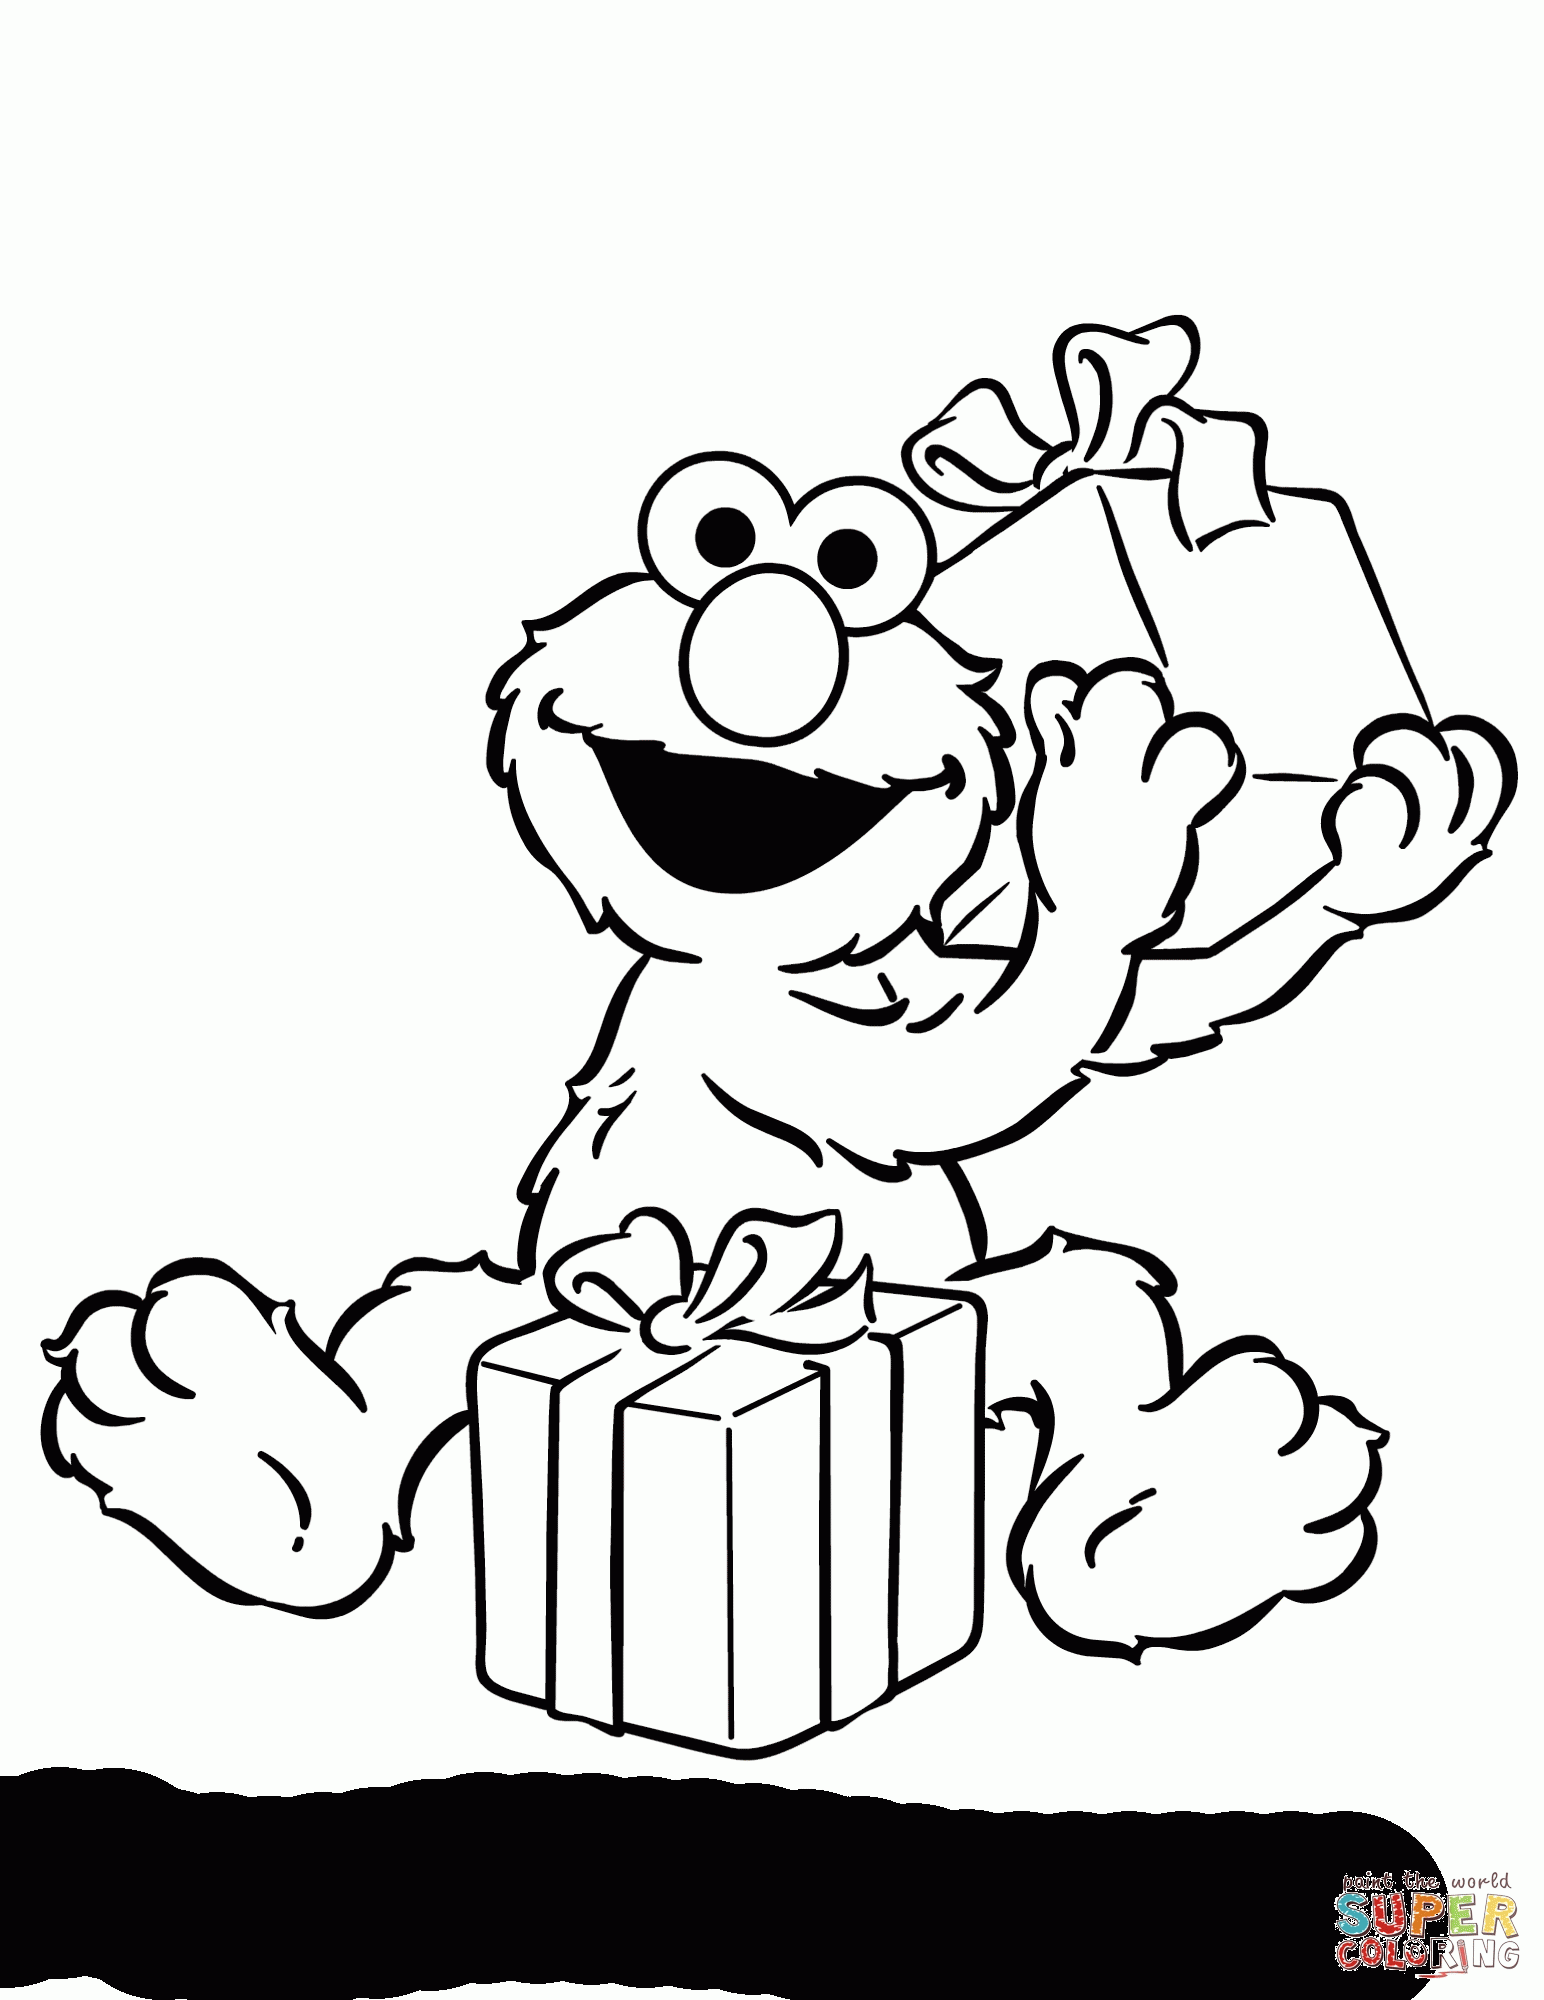 Related Elmo Coloring Pages item-13360, Elmo Coloring Pages Elmo ...